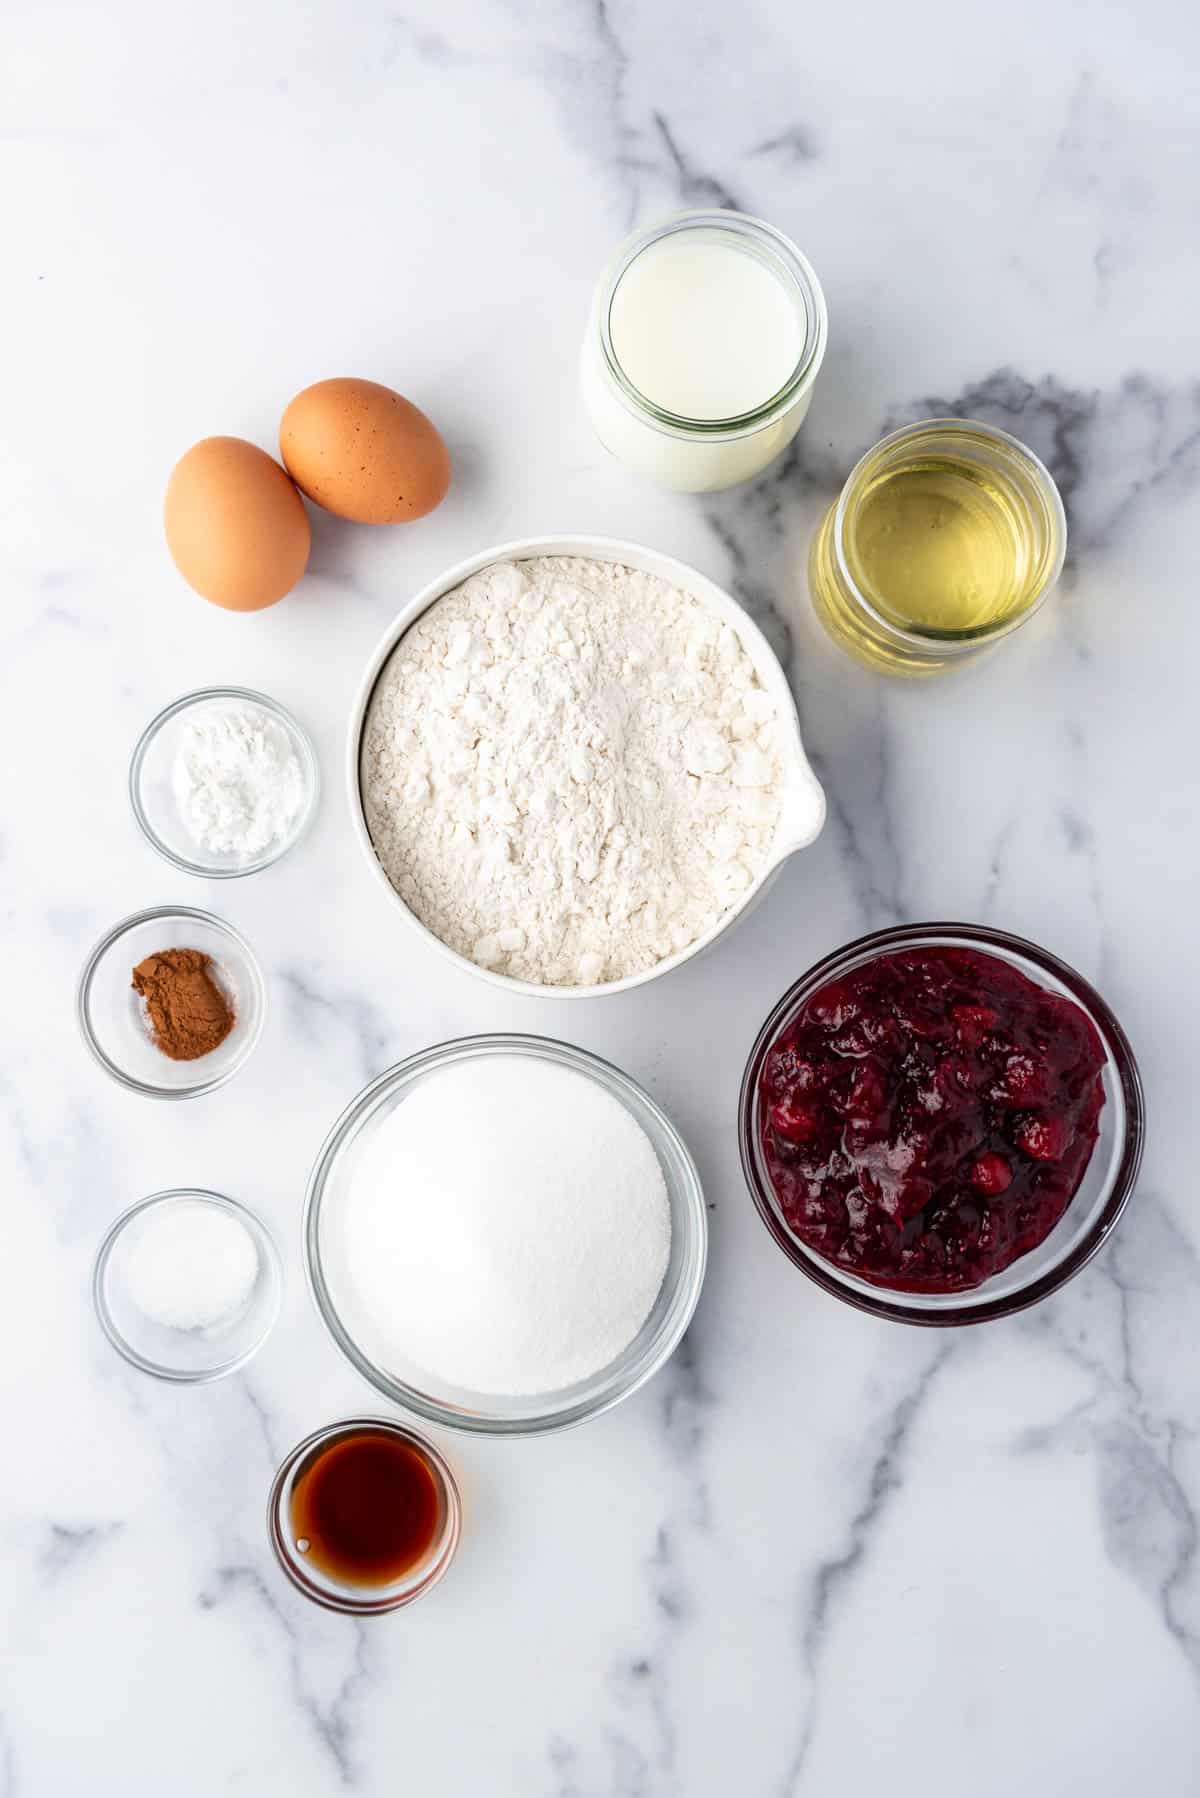 Ingredients for cranberry sauce muffins.